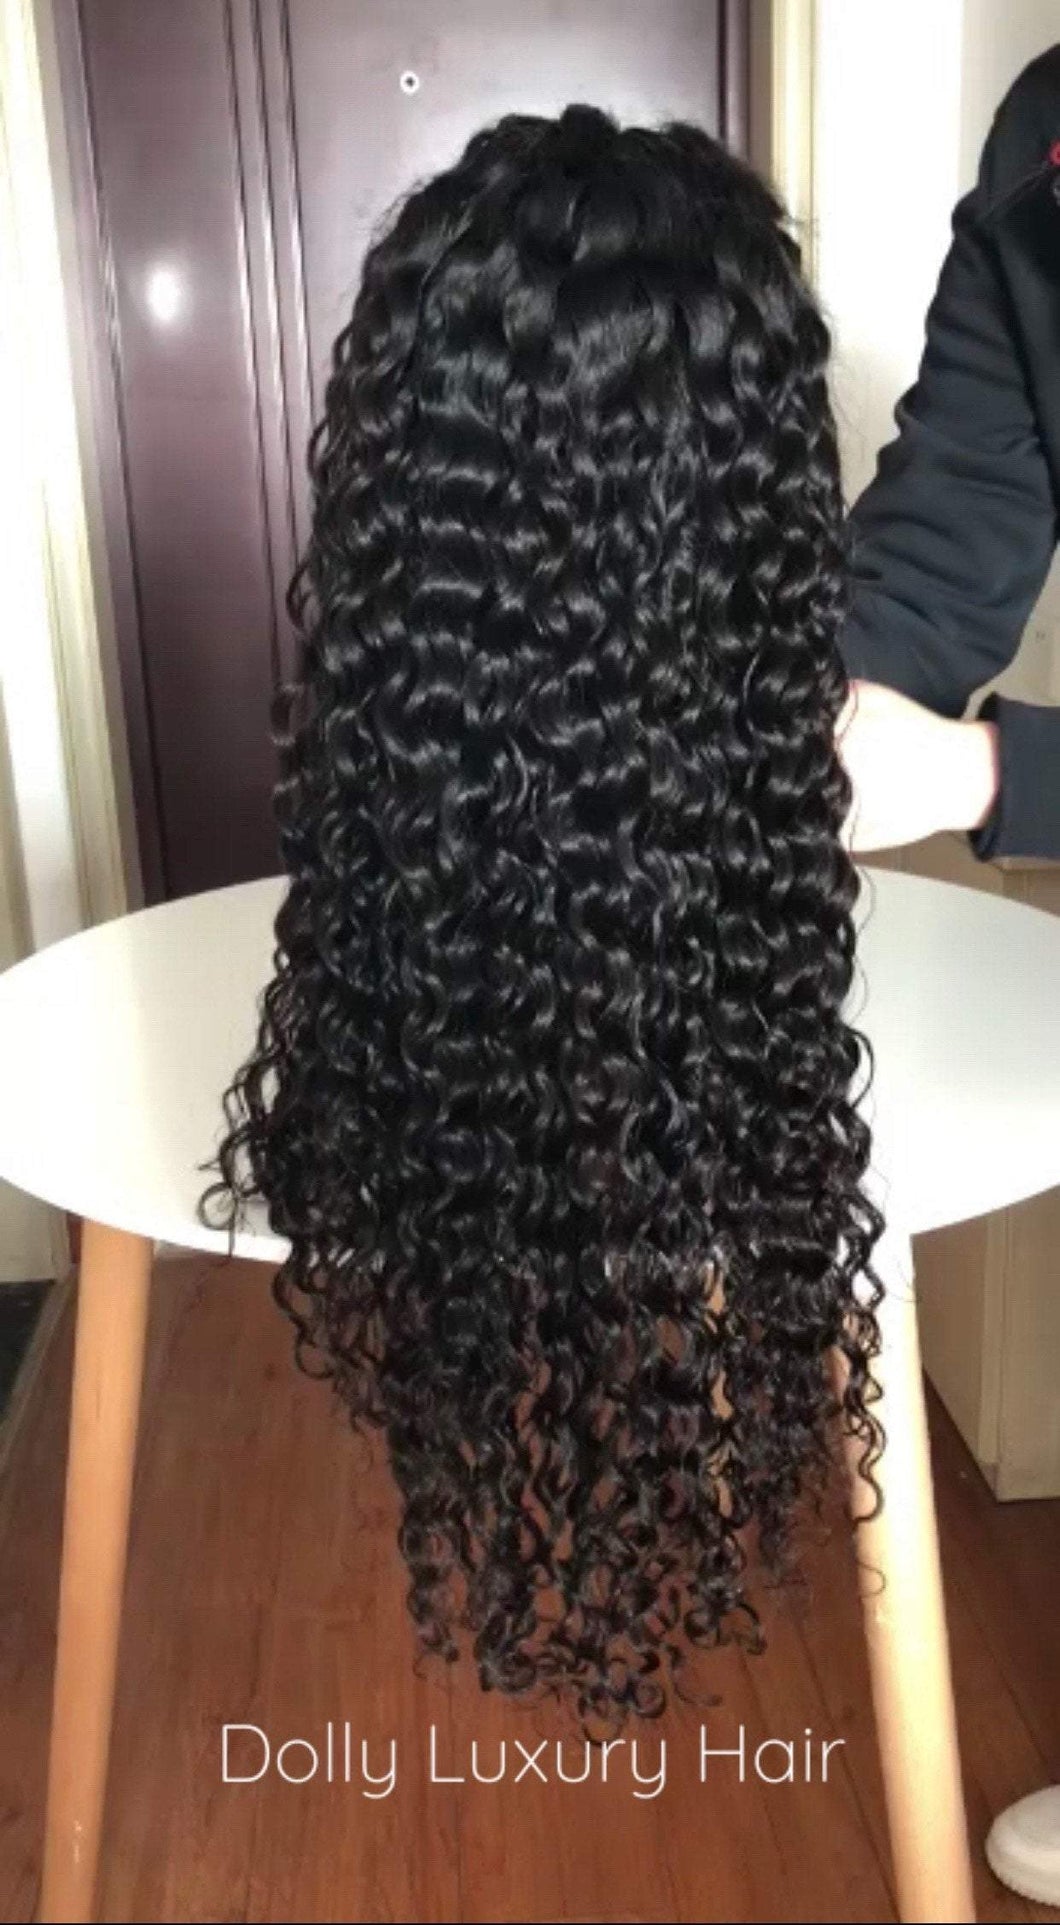 Luxury 30” 32” 34” 36” 38” 40” inches Natural Black #1B Virgin Human Hair Swiss 13x4 Lace Front Glueless Wig Water Wave Curly Long